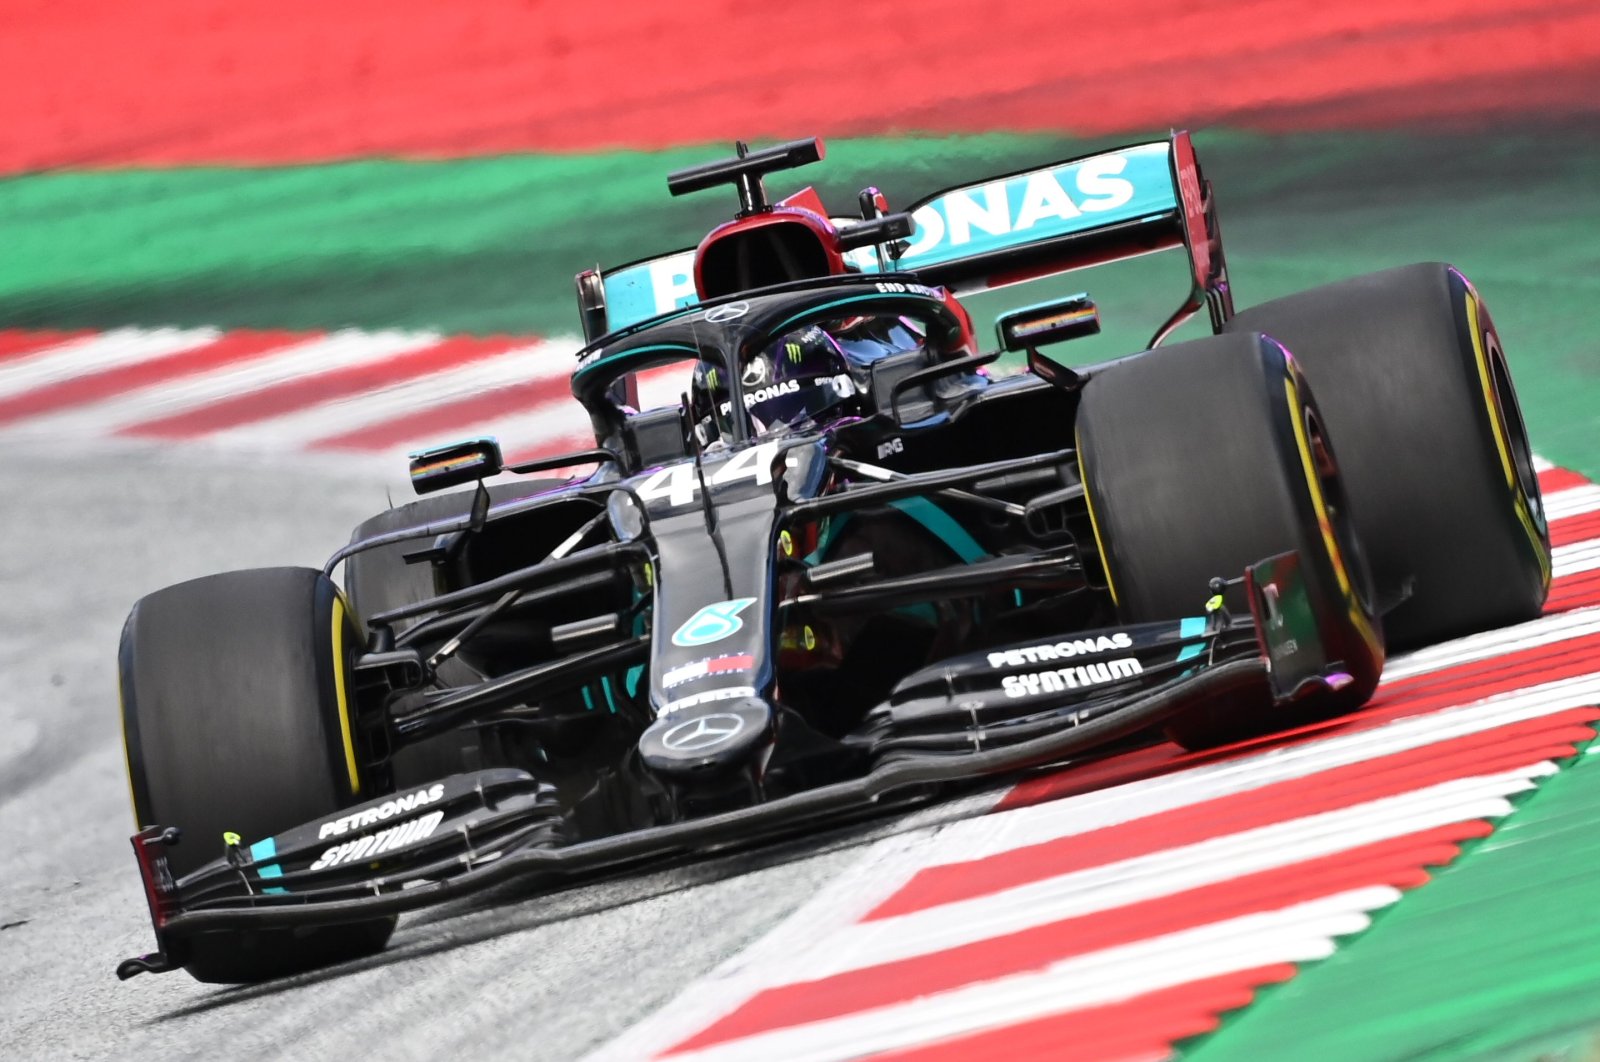 Mercedes' Lewis Hamilton steers his car during the F1 Styrian Grand Prix race in Spielberg, Austria, July 12, 2020. (AFP Photo)